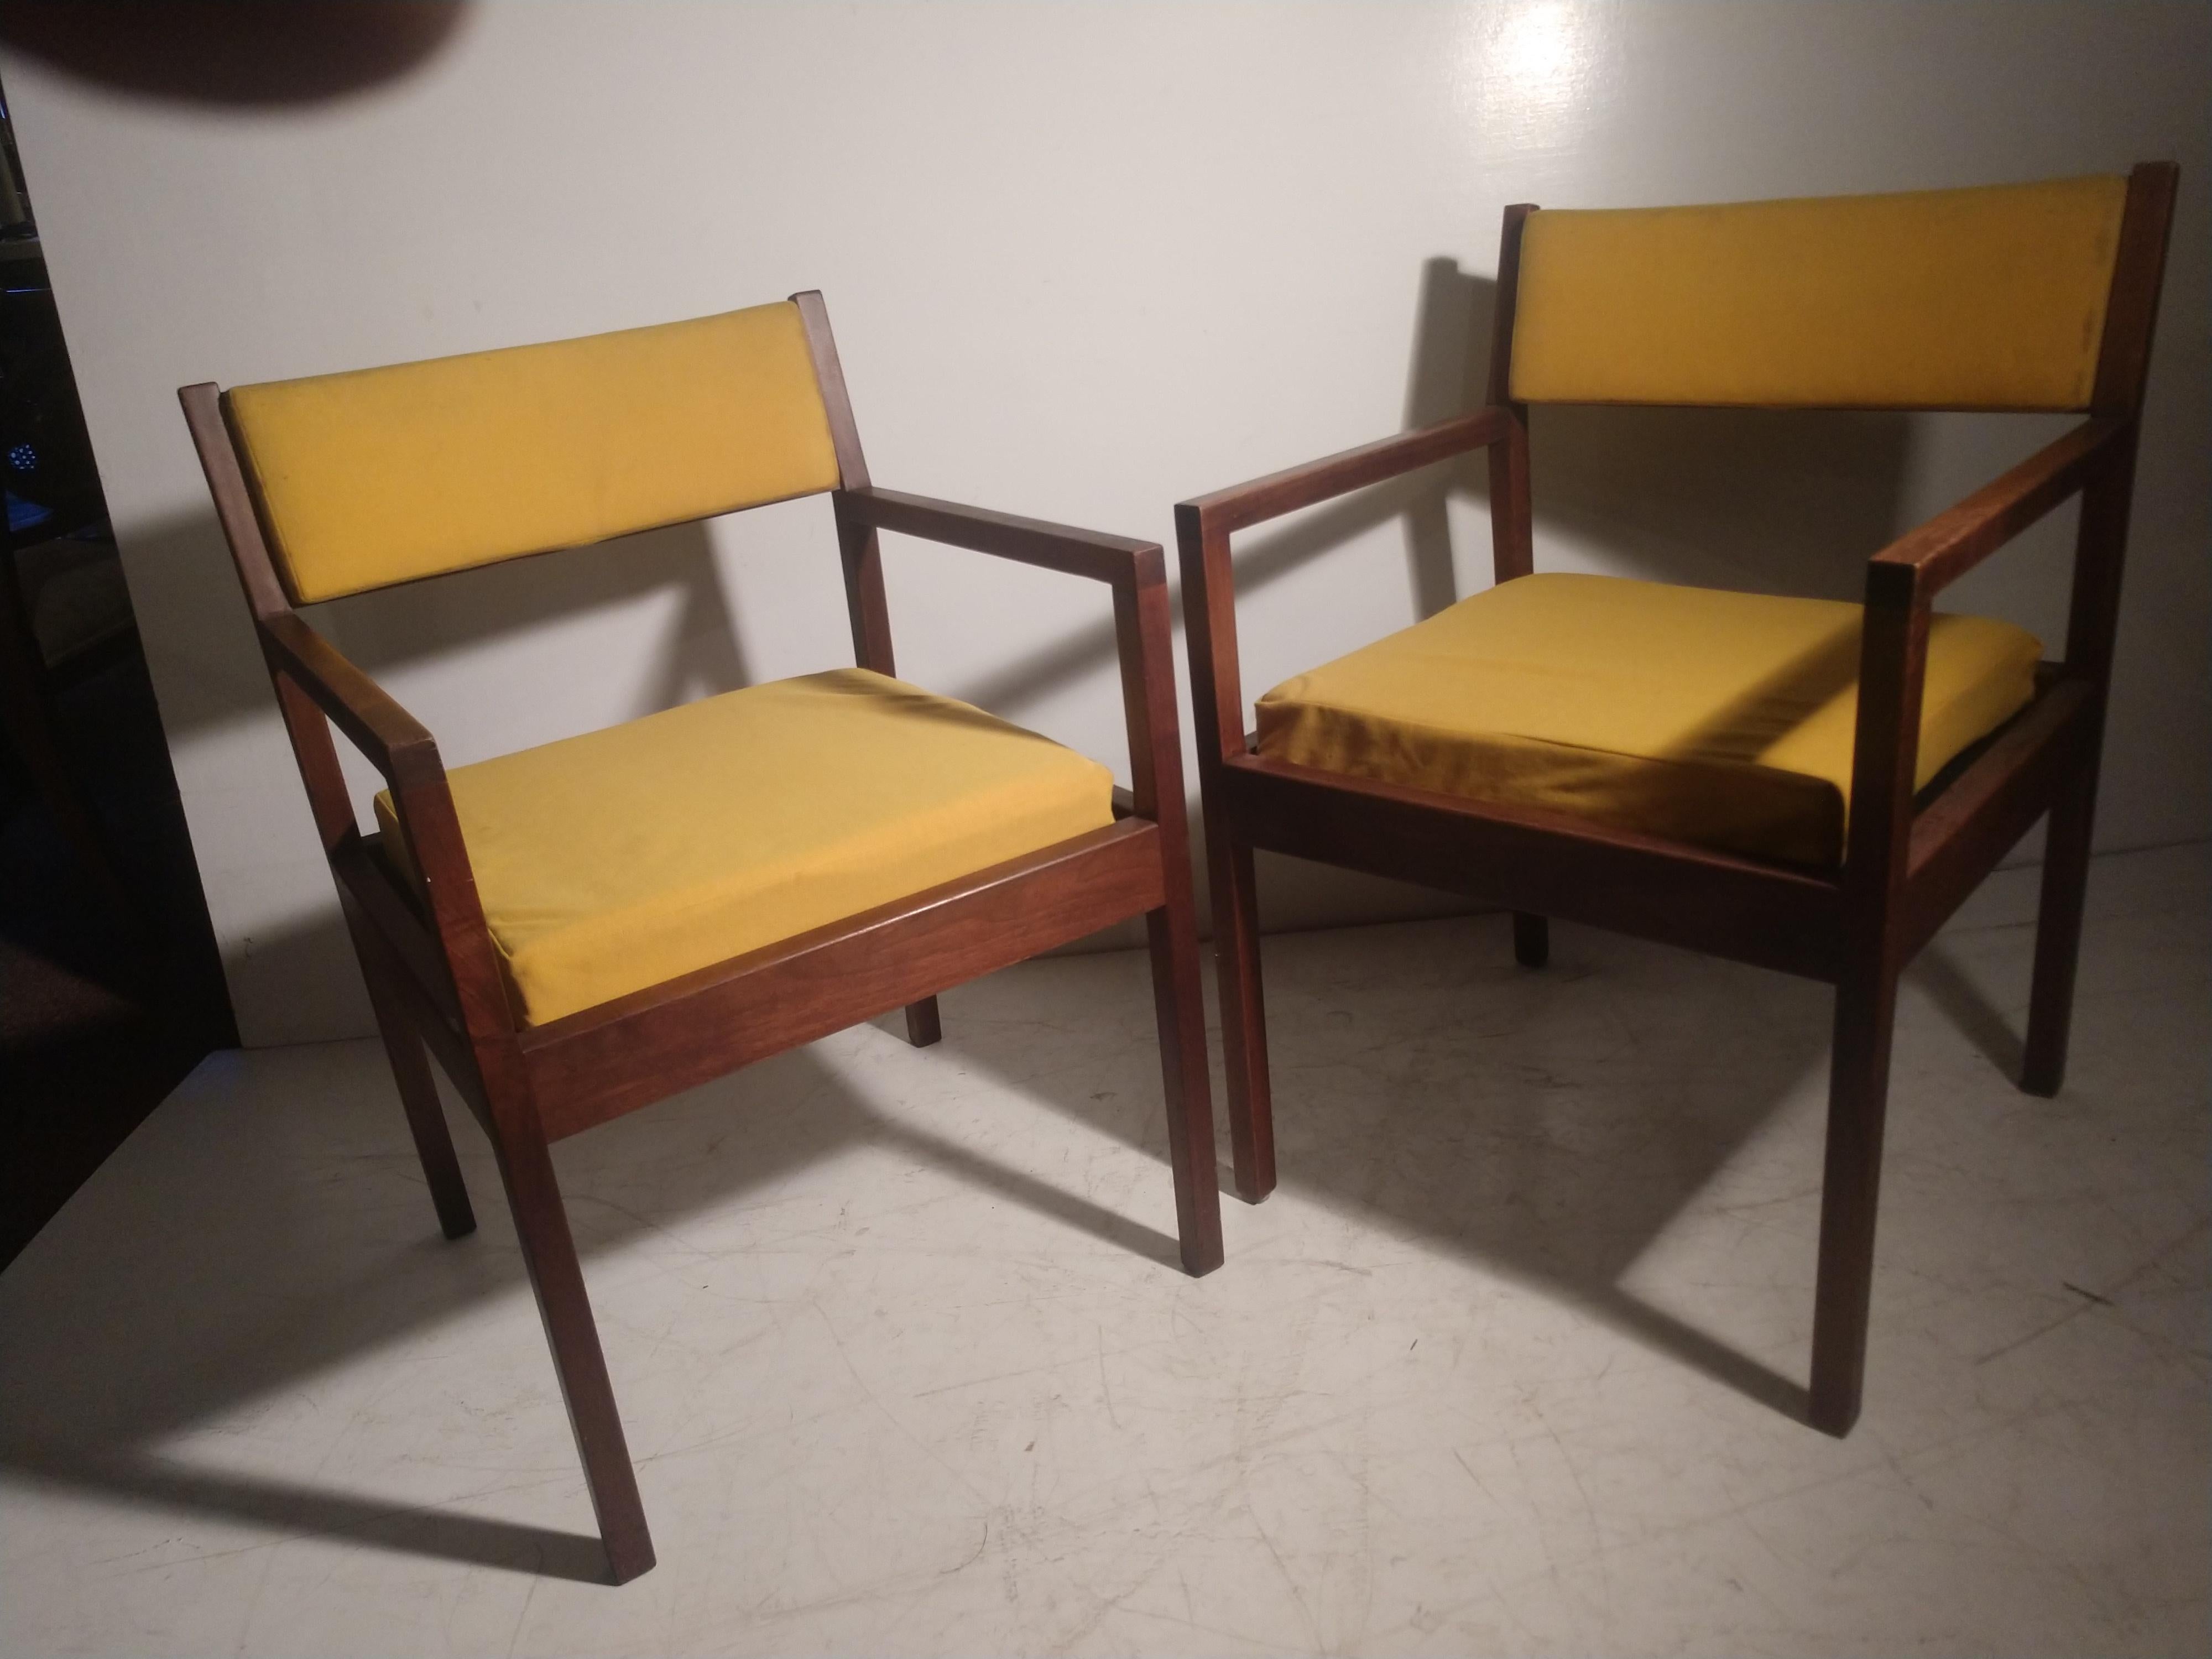 Pair of Mid-Century Modern Walnut Armchairs by George Nelson for Herman Miller 1